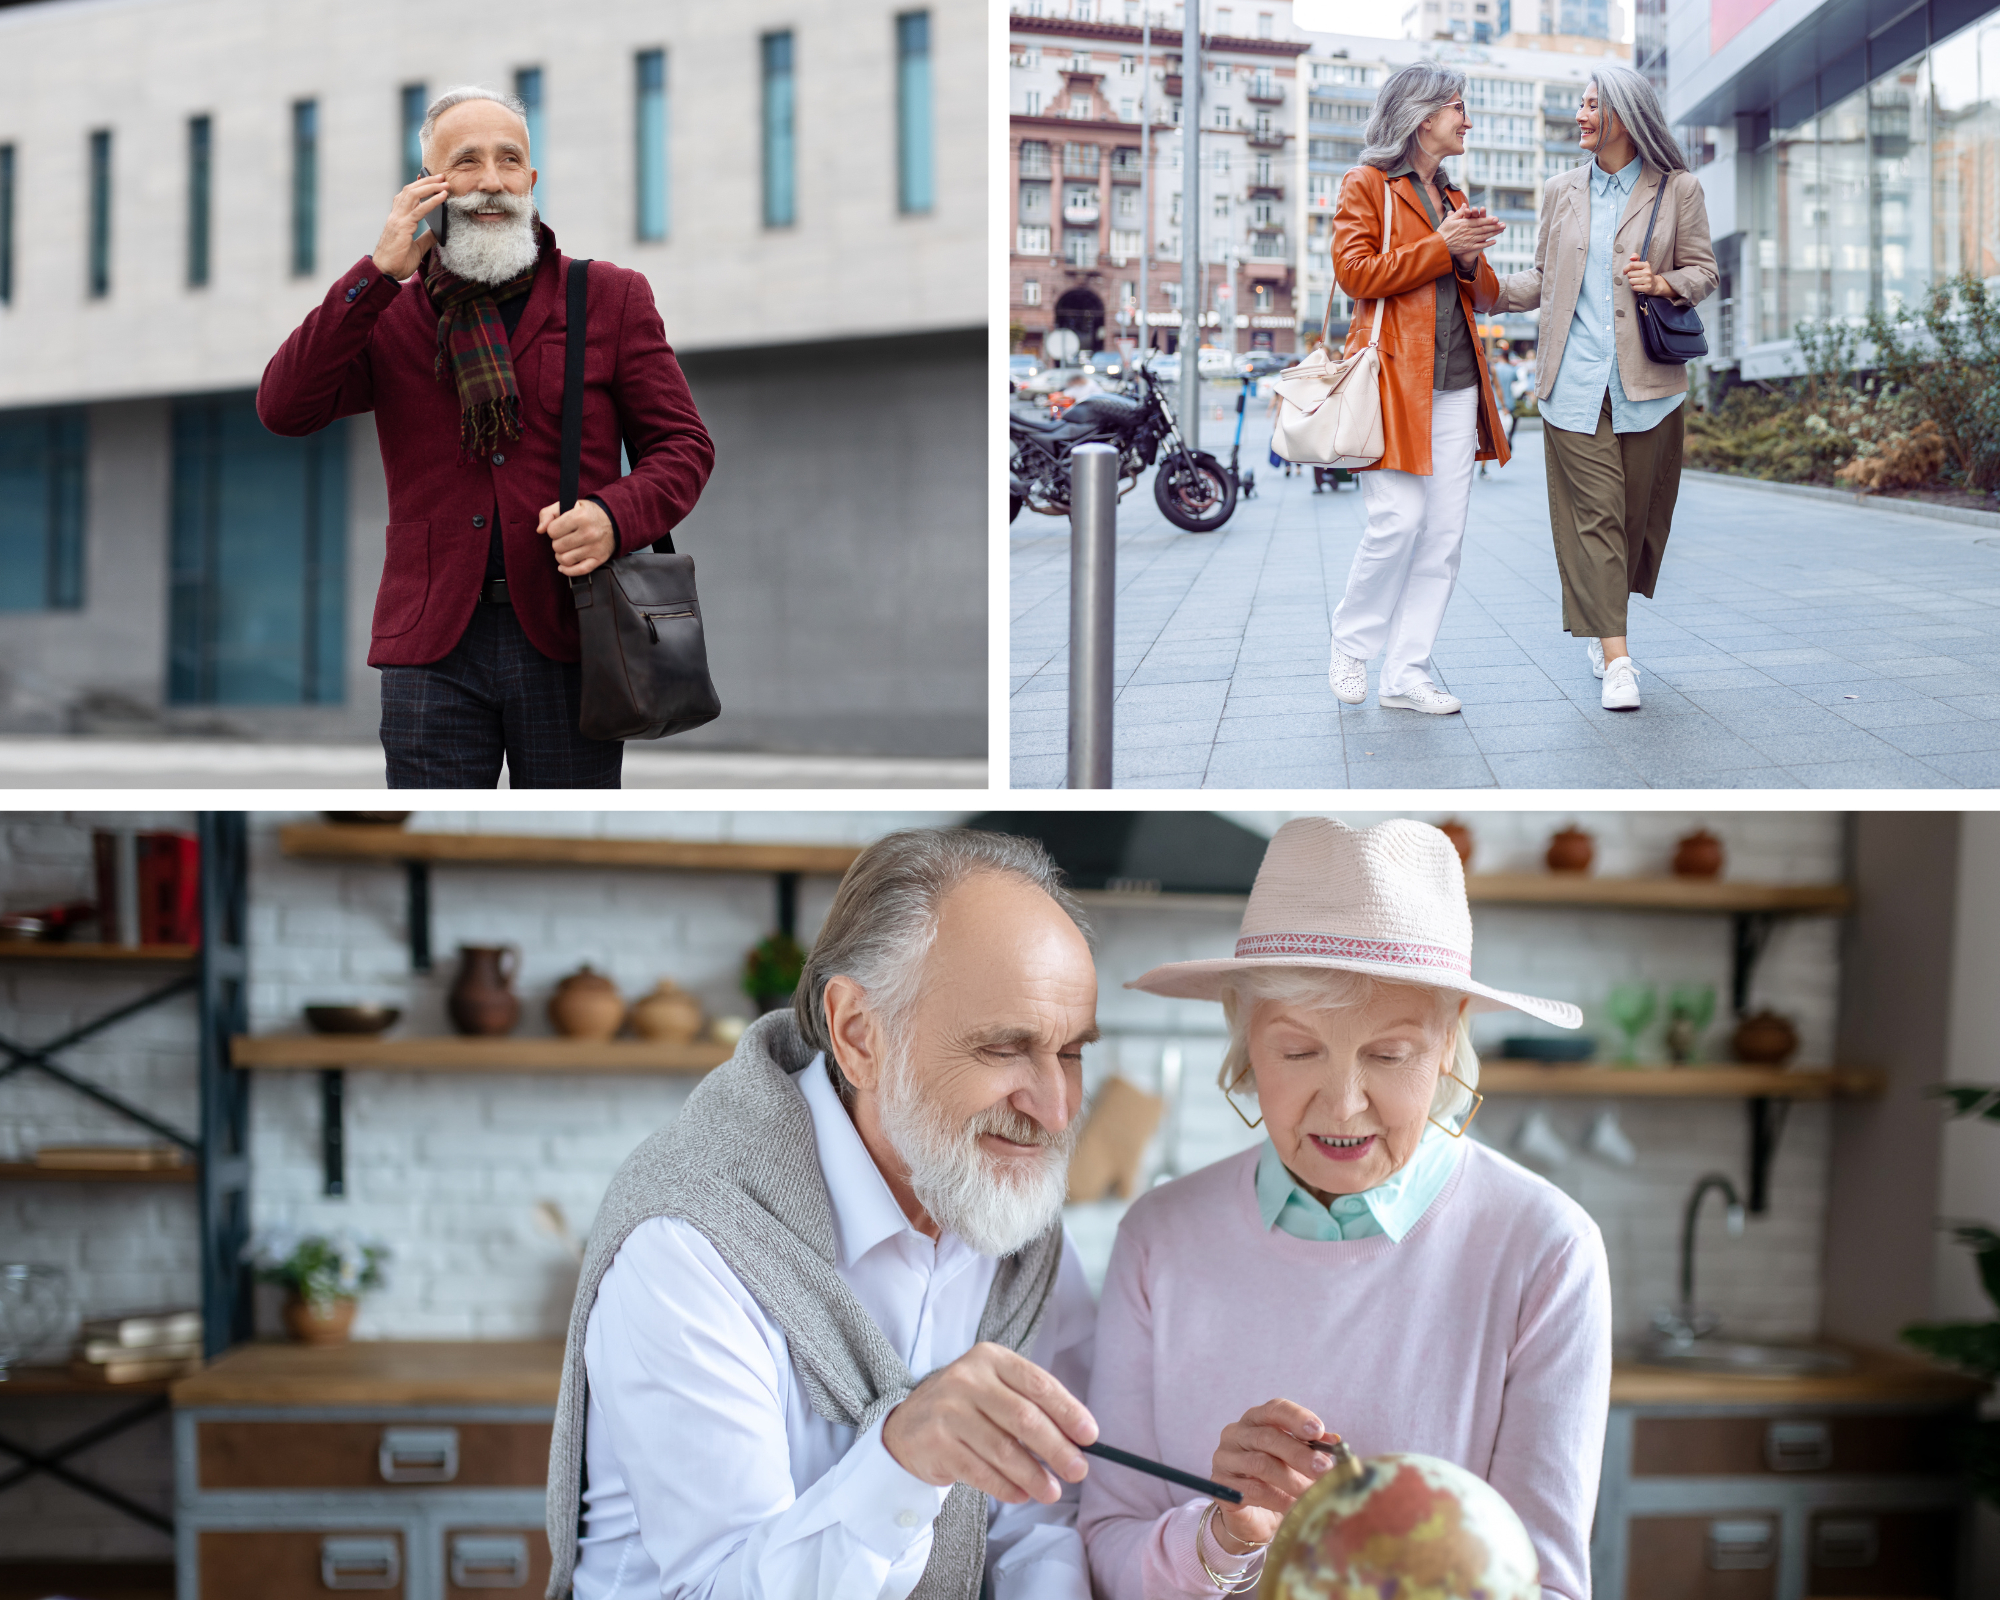 Seniors can be fashionable and dress their age